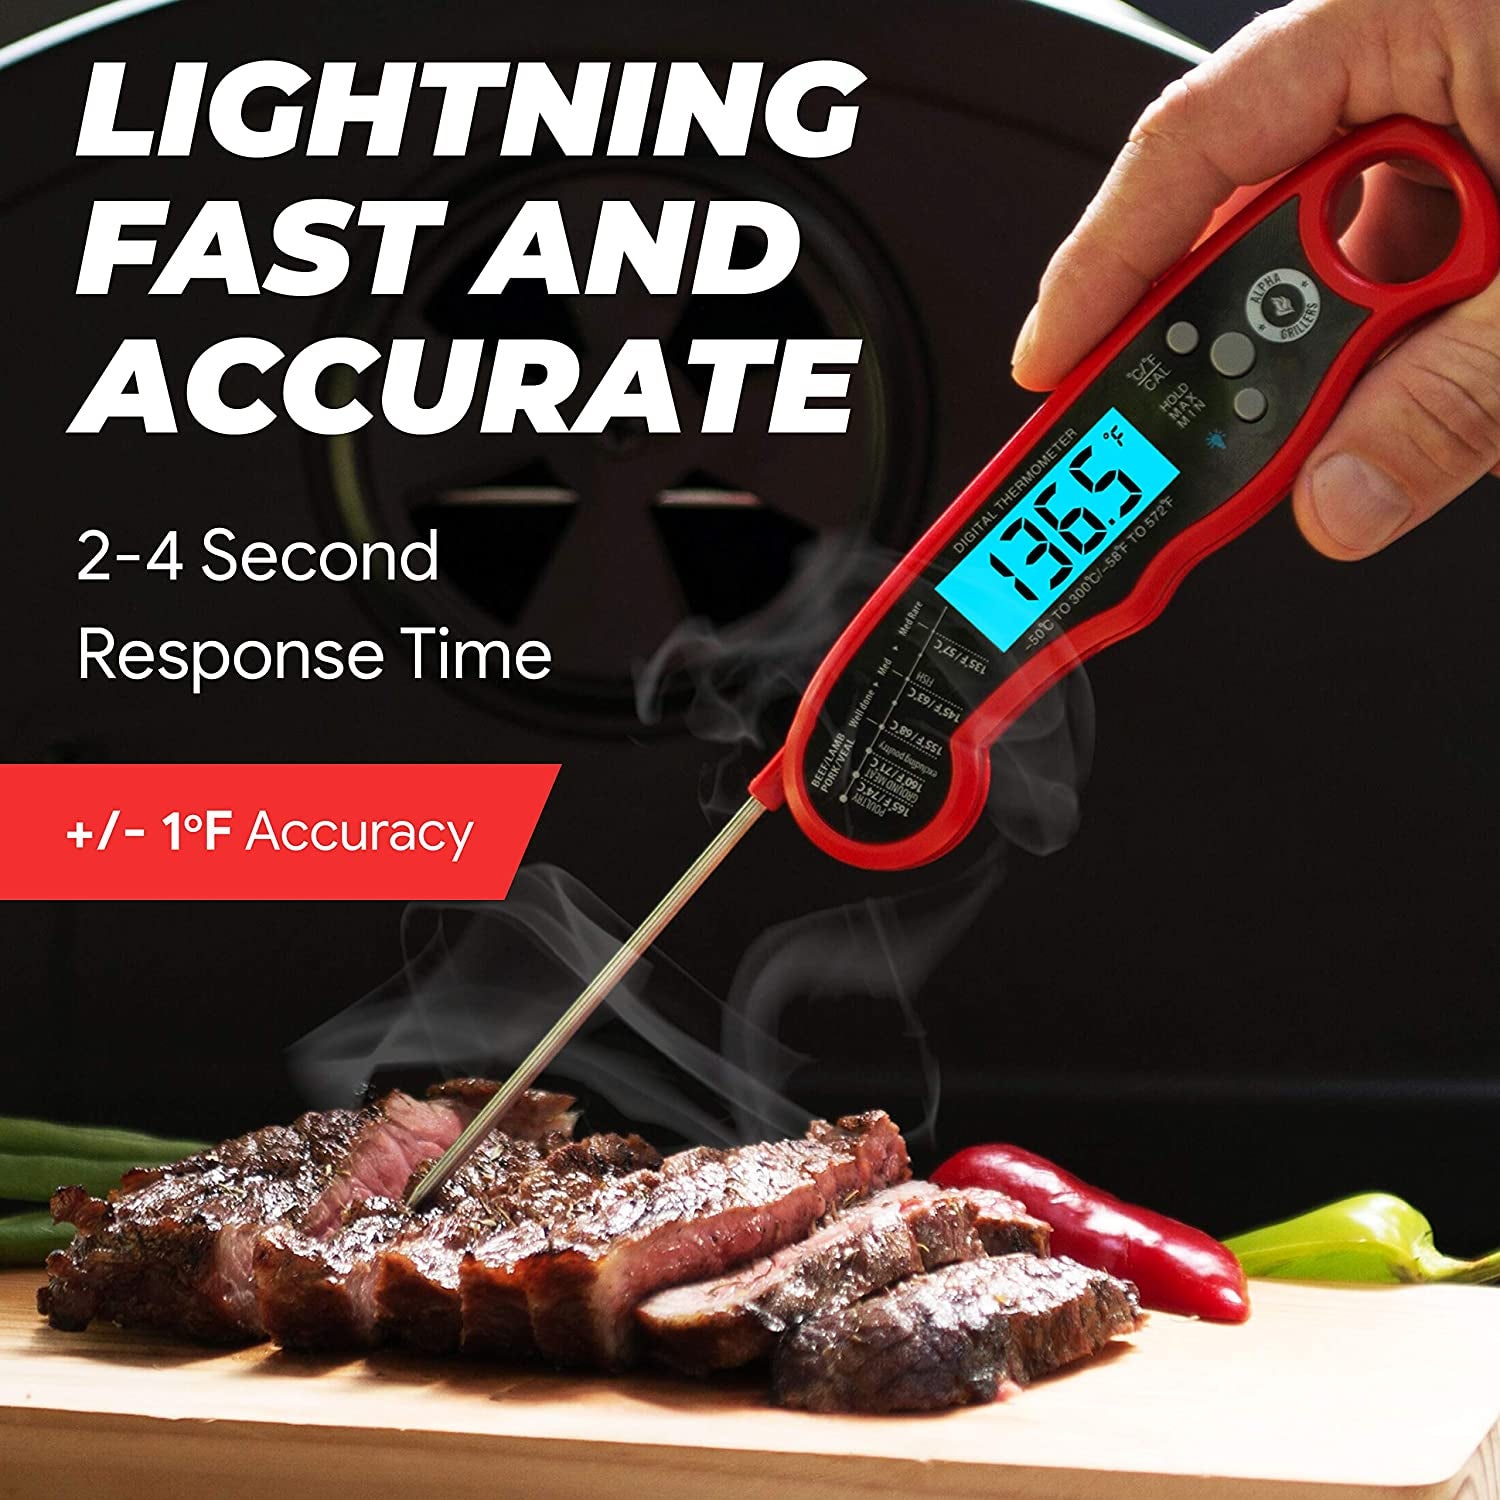 The red thermometer with a digital screen and text on the image that says it has a 2-4 second response time